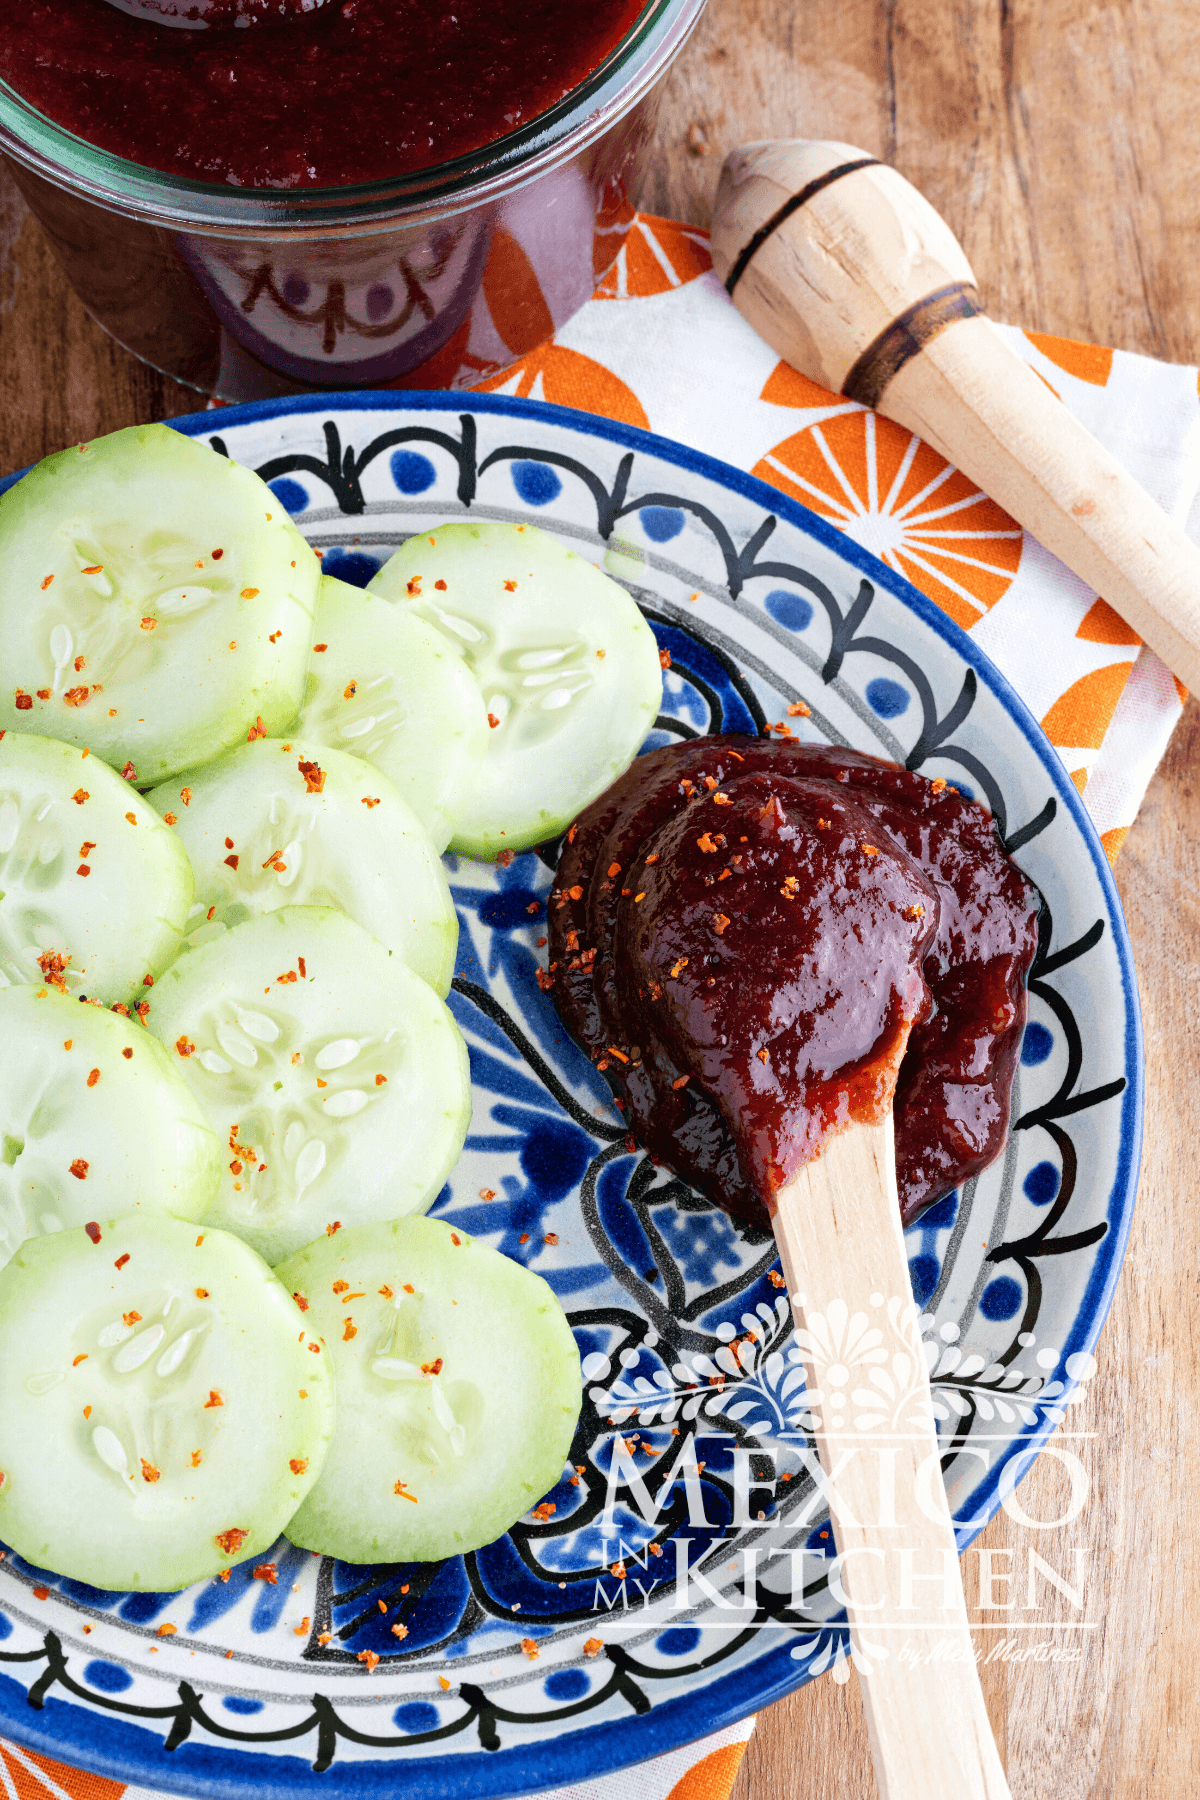 Slices of cucumber next to a spoon full of chamoy sauce.